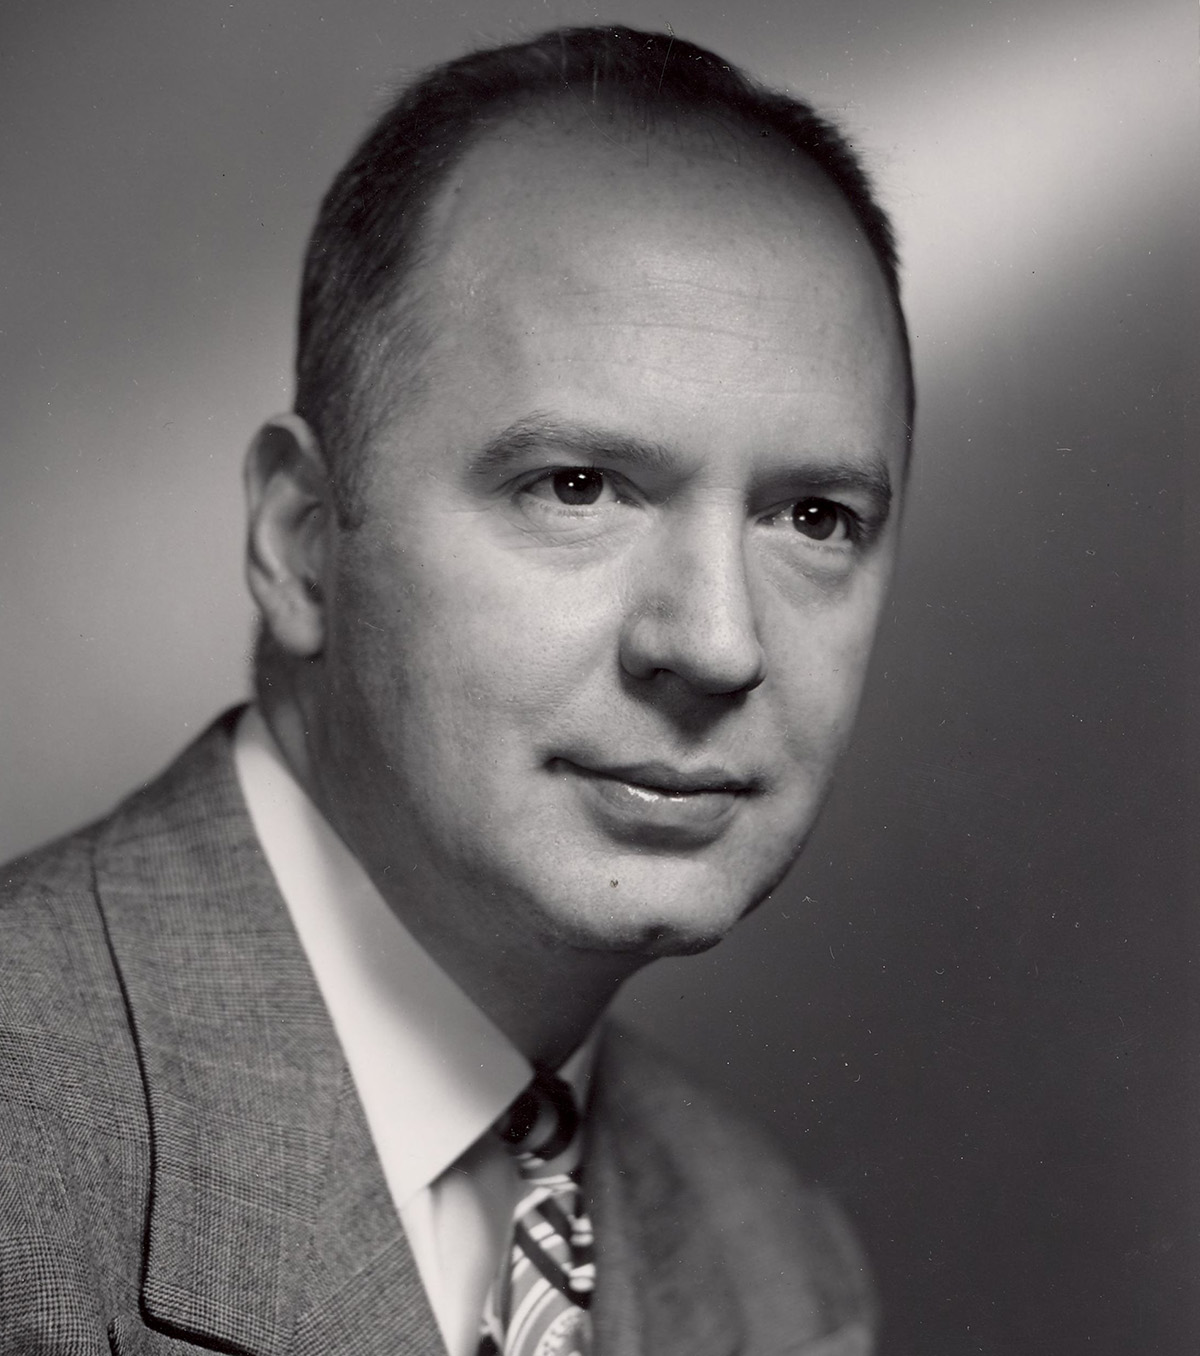 Minard W. Stout, President of the University of Nevada from 1952-1957, poses for a formal portrait.